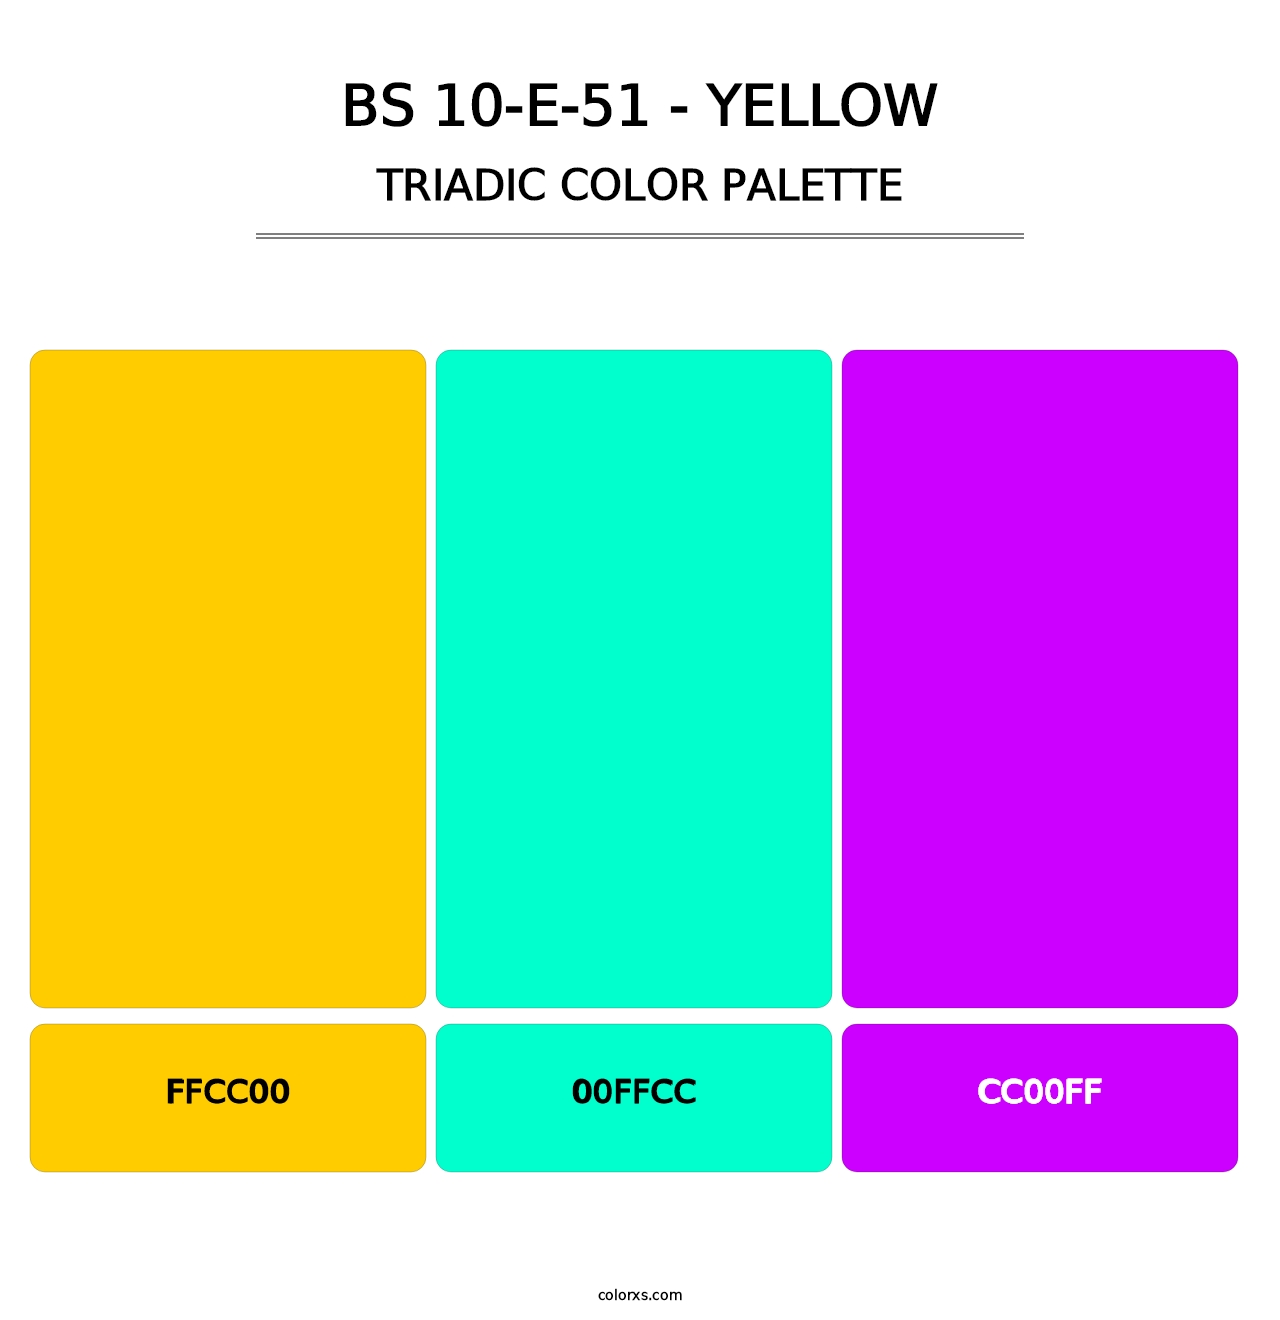 BS 10-E-51 - Yellow - Triadic Color Palette